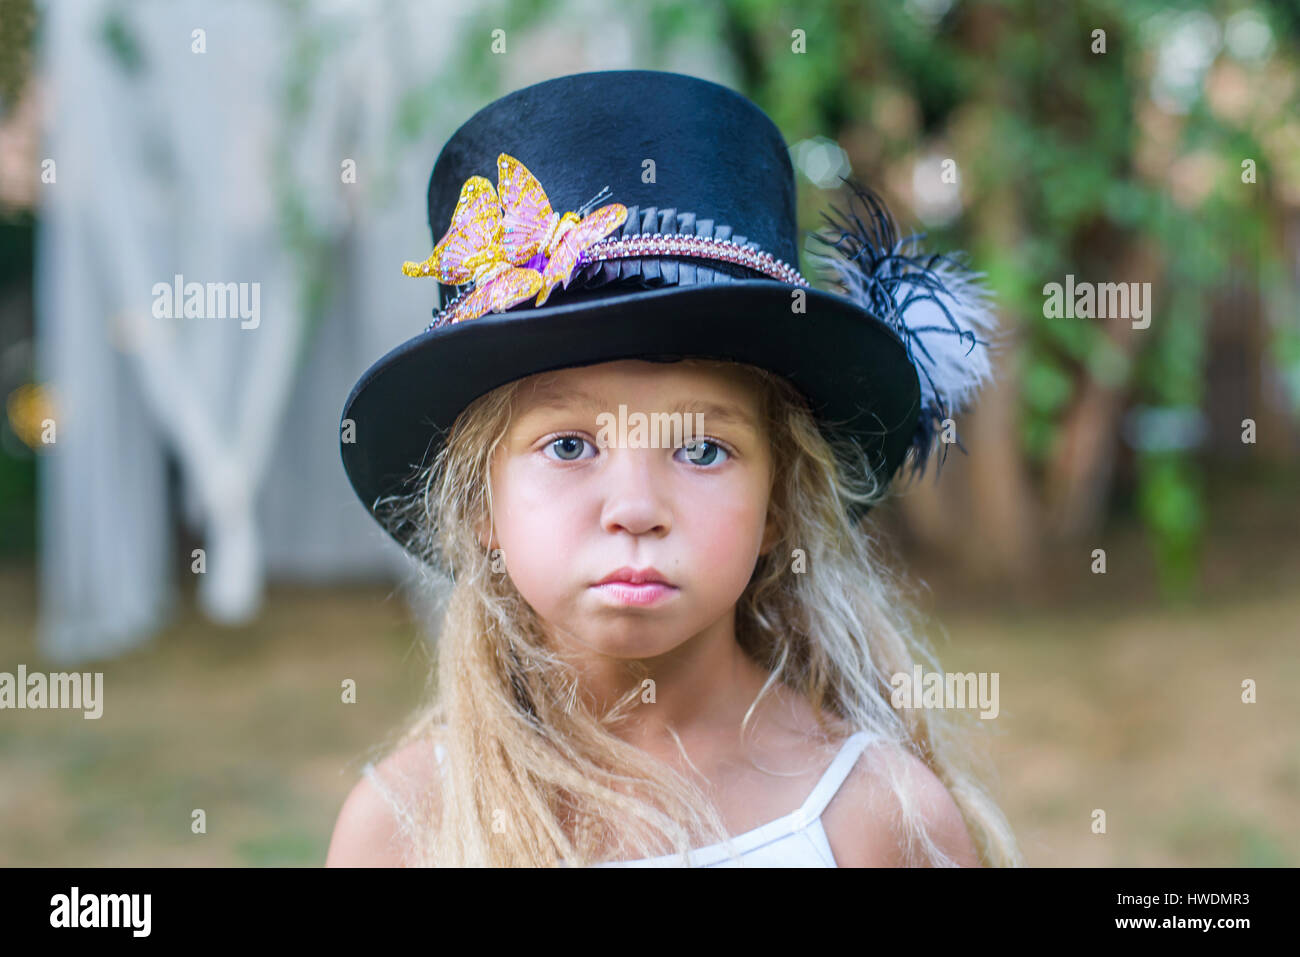 Portrait of young girl, wearing top hat Stock Photo